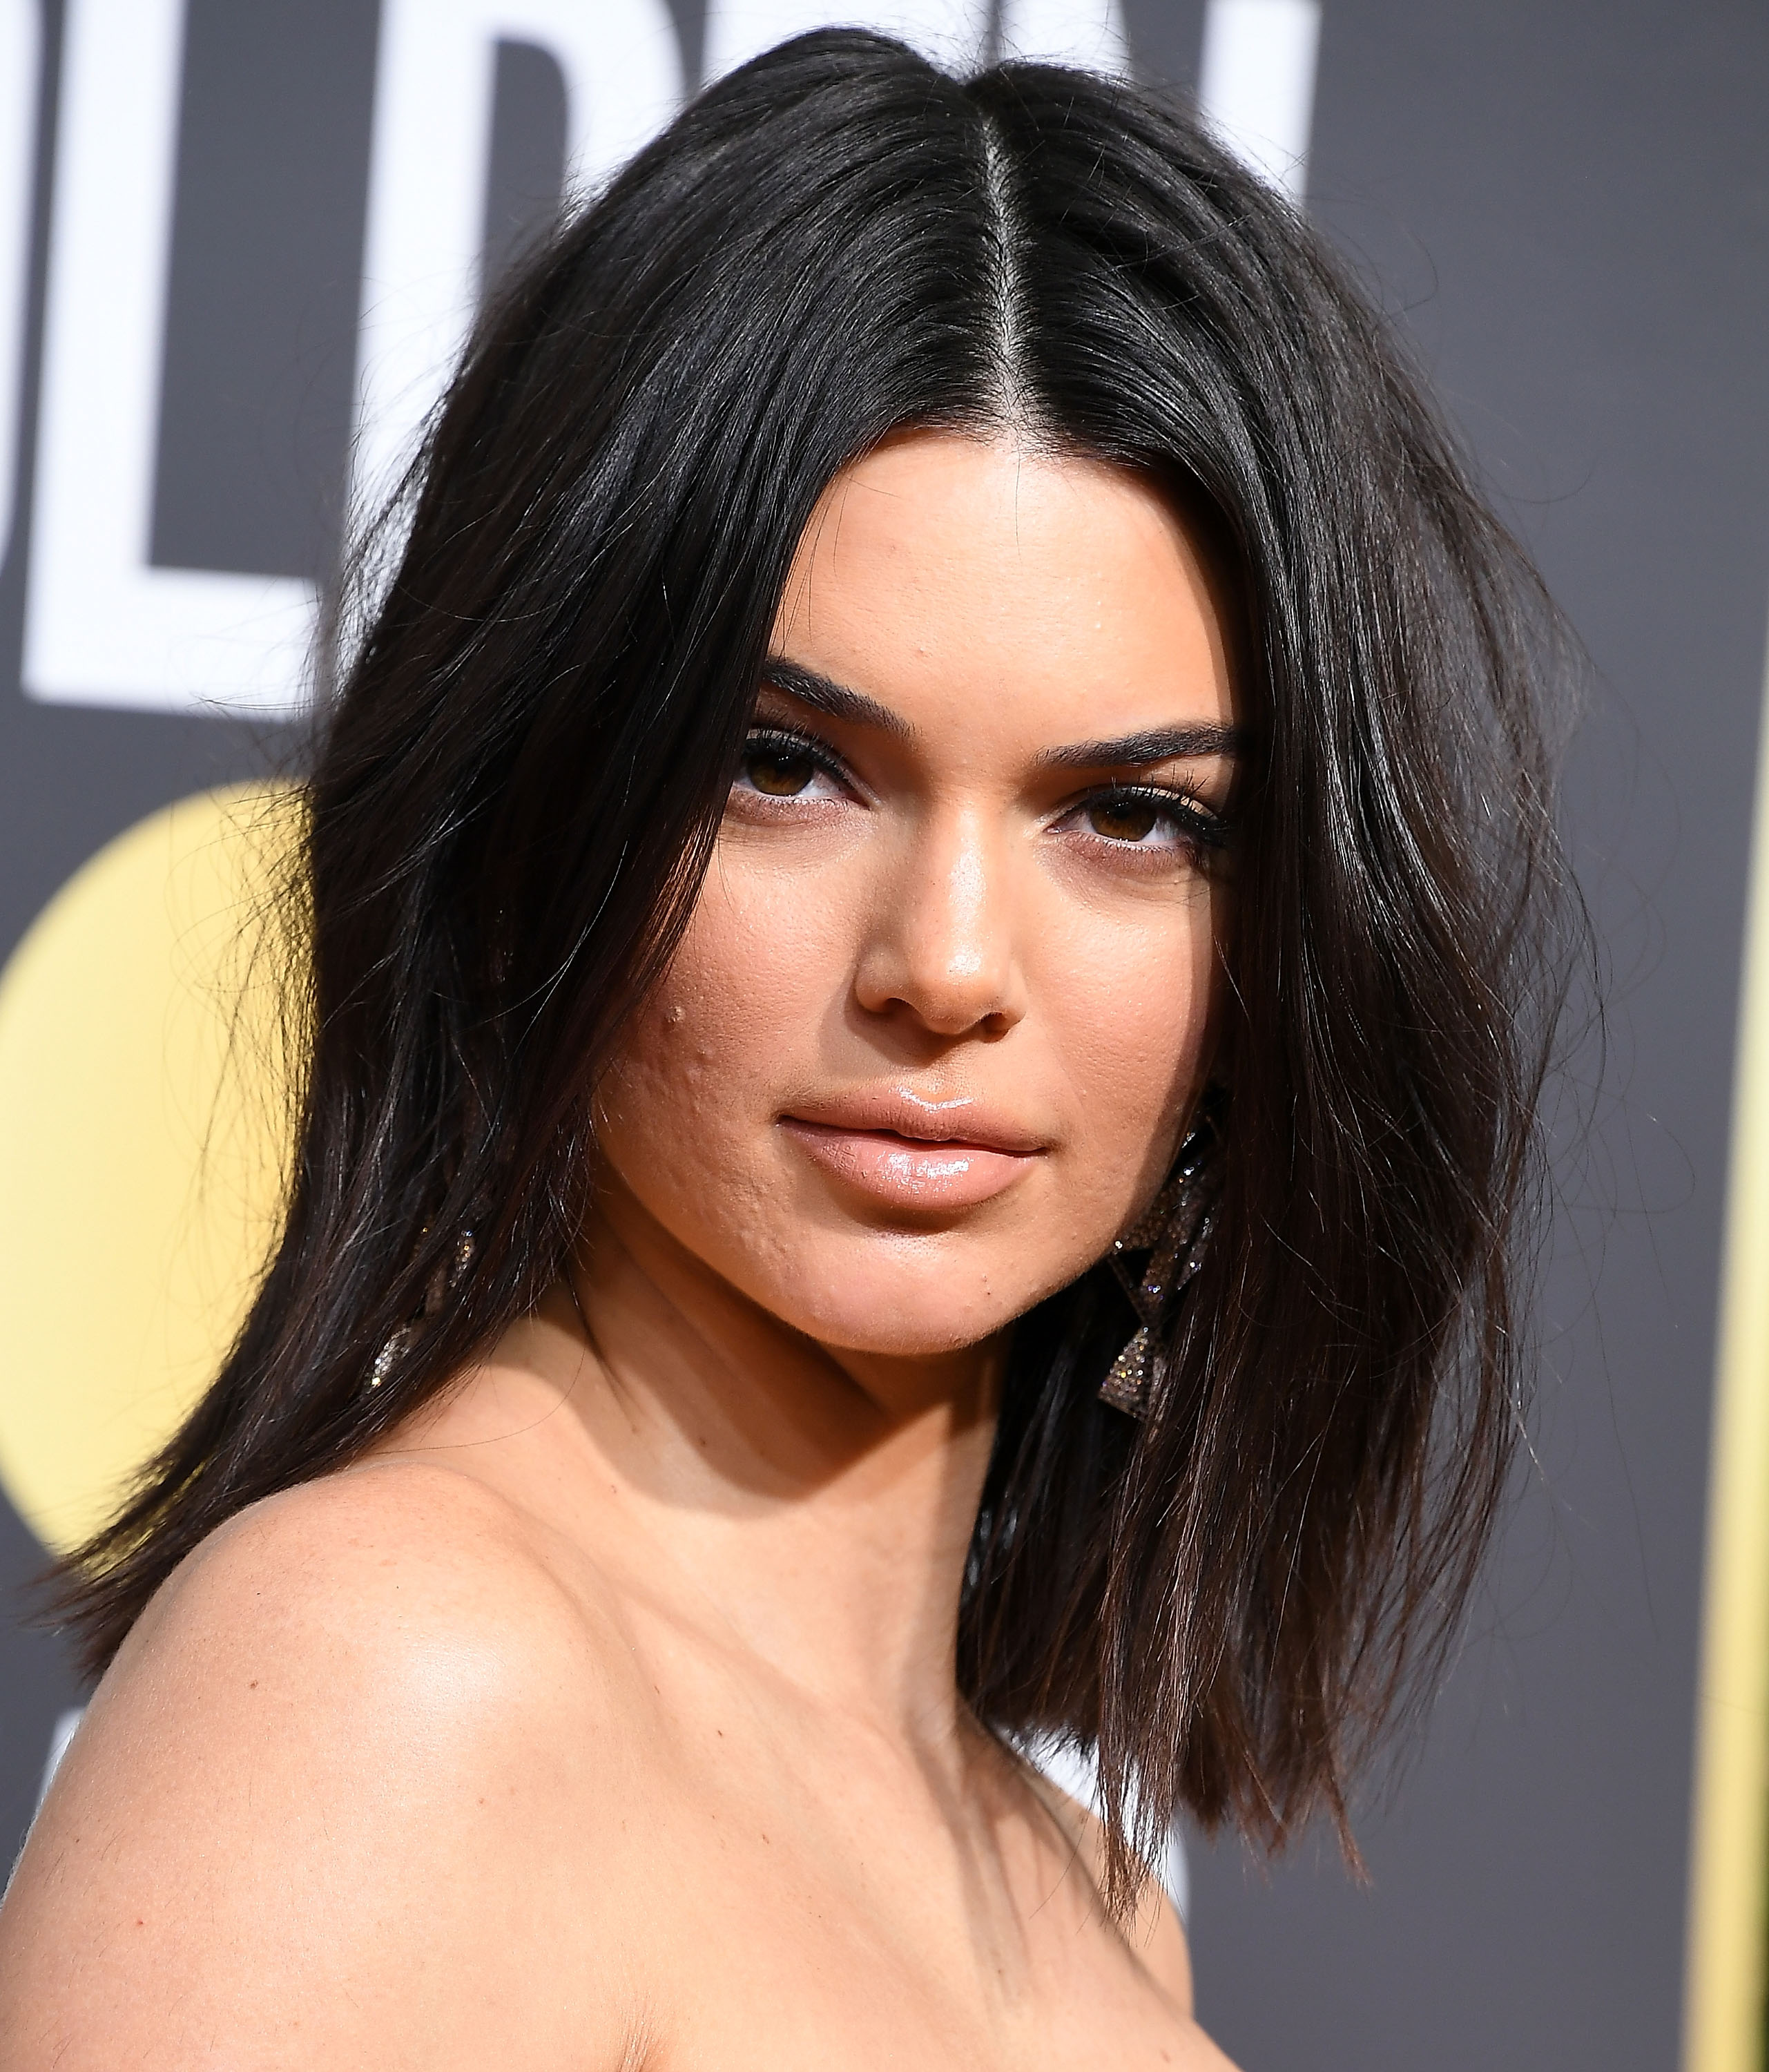 Kendall Jenner at the 75th Annual Golden Globe Awards in January 2018 | Source: Getty Images